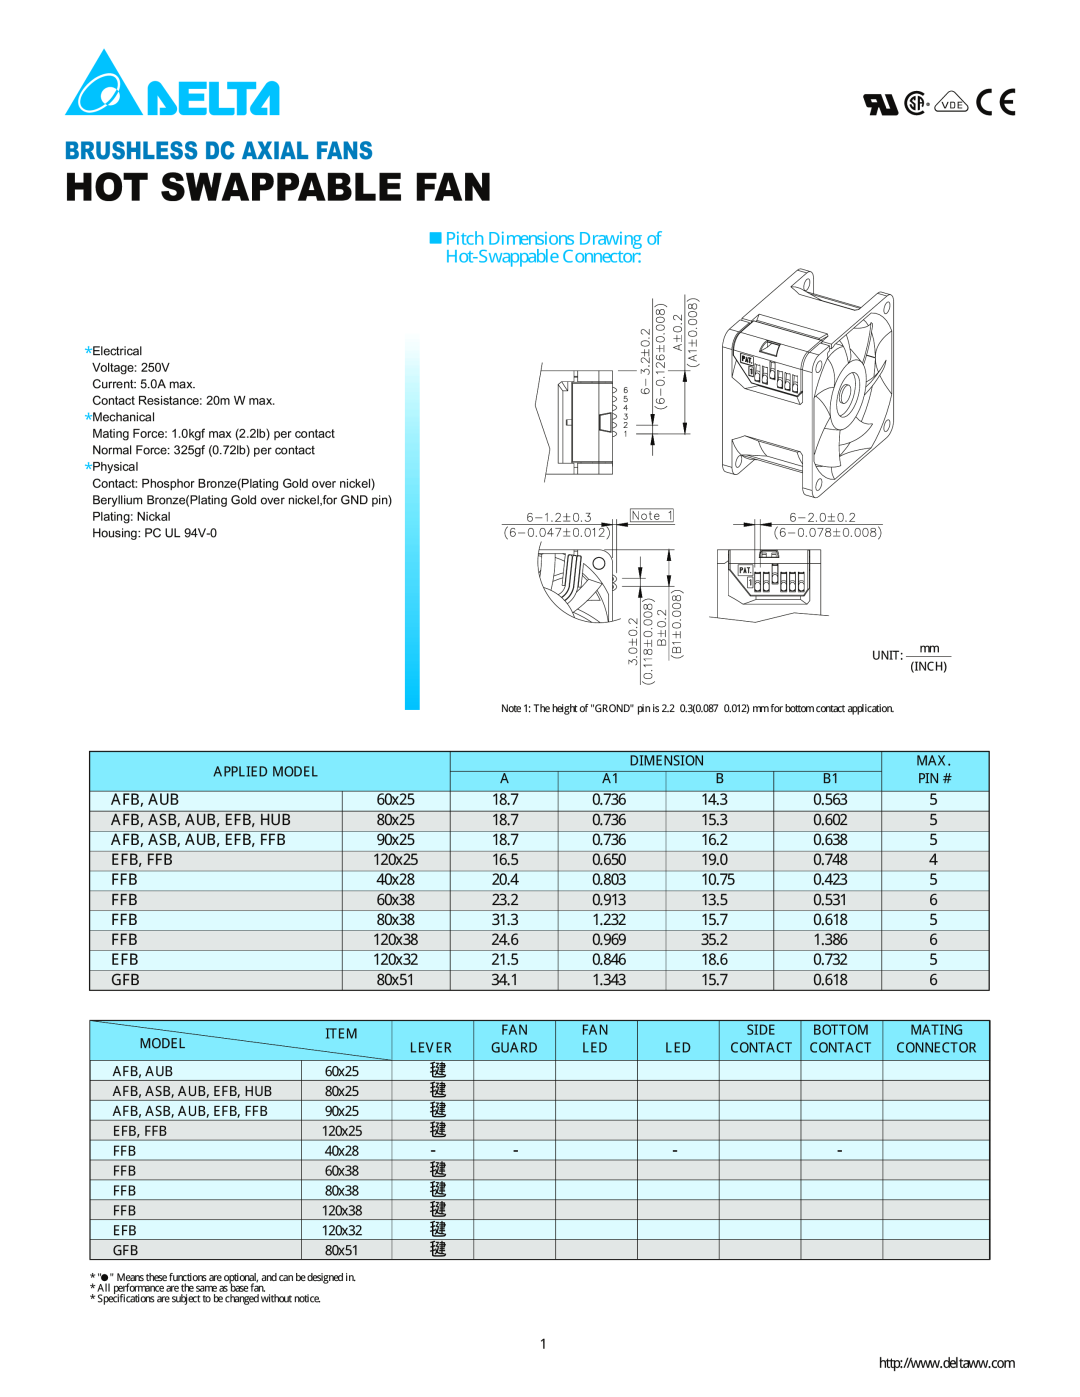 Delta Electronics DC Axial Fans manual Hot Swappable Fan, Brushless Dc Axial Fans, Pitch Dimensions Drawing of 